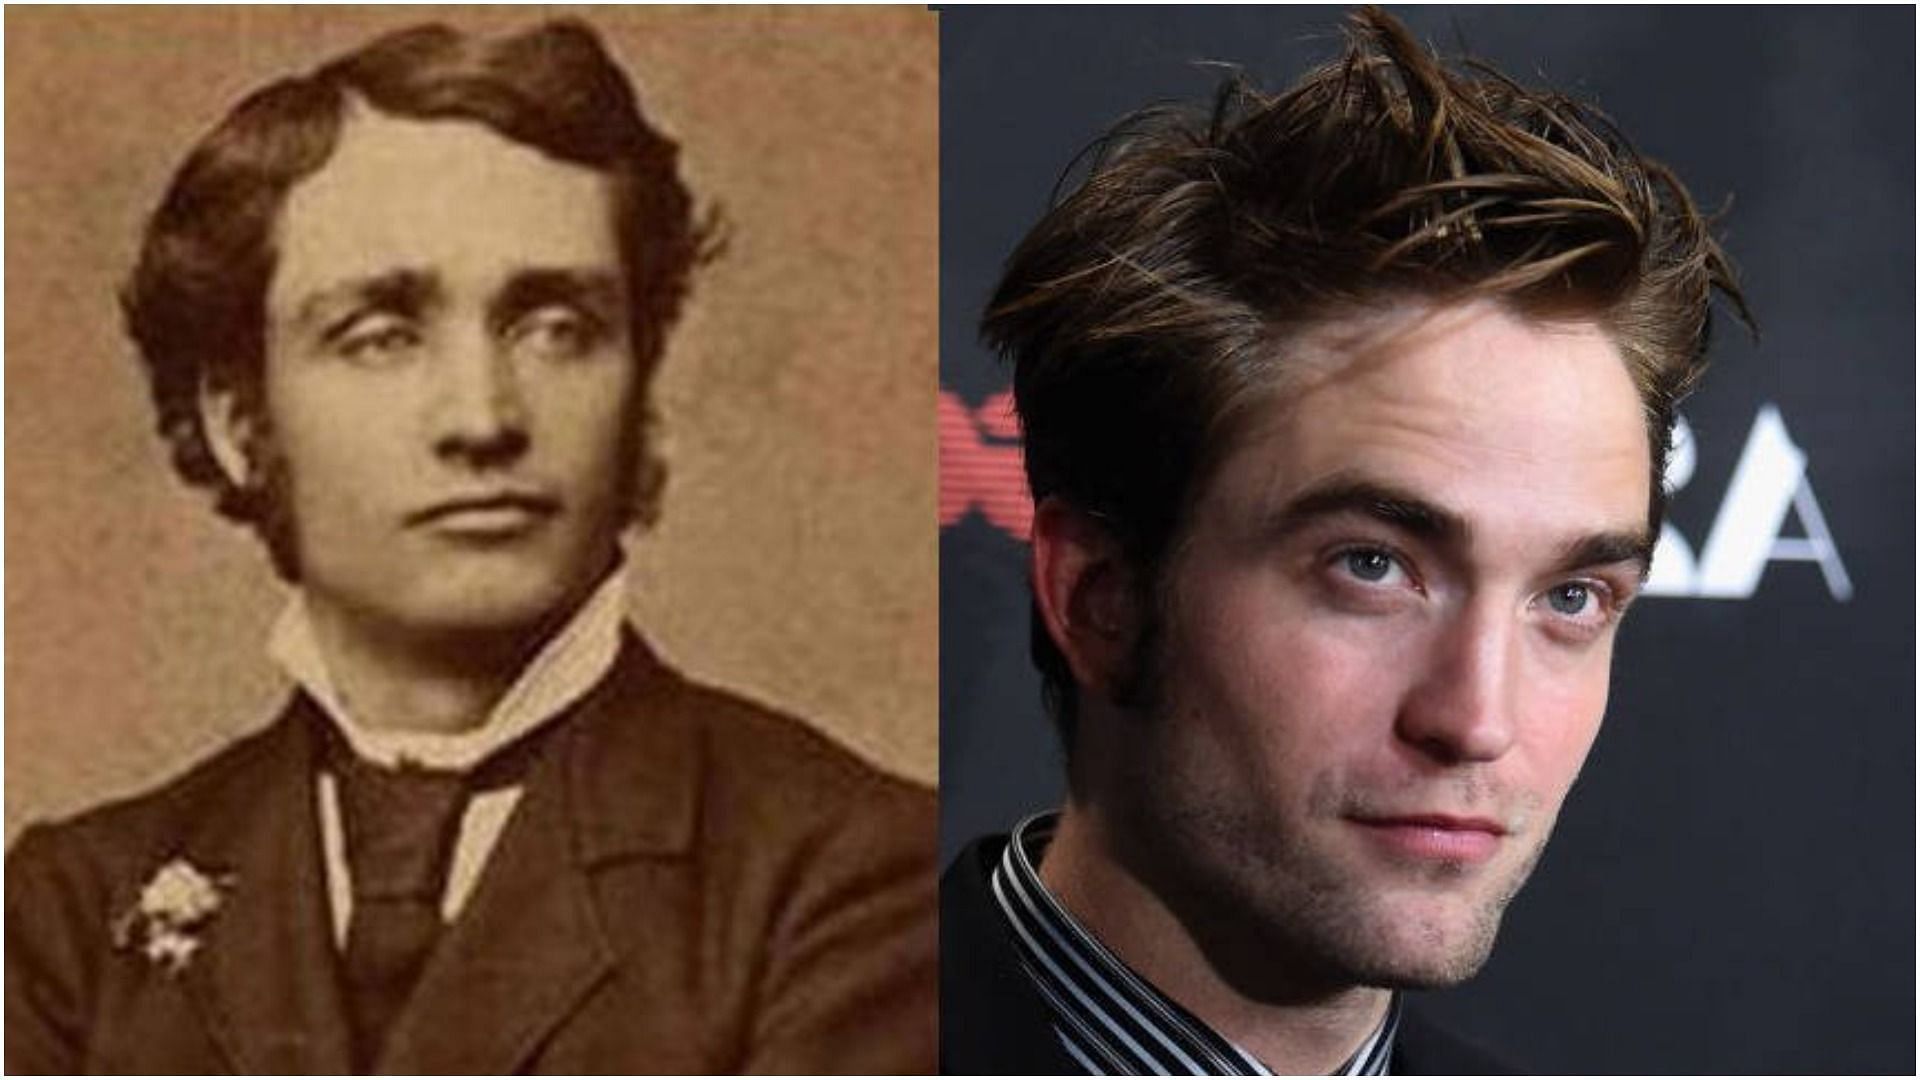 Robert Pattinson and his lookalike (Images via Imgur and Getty)